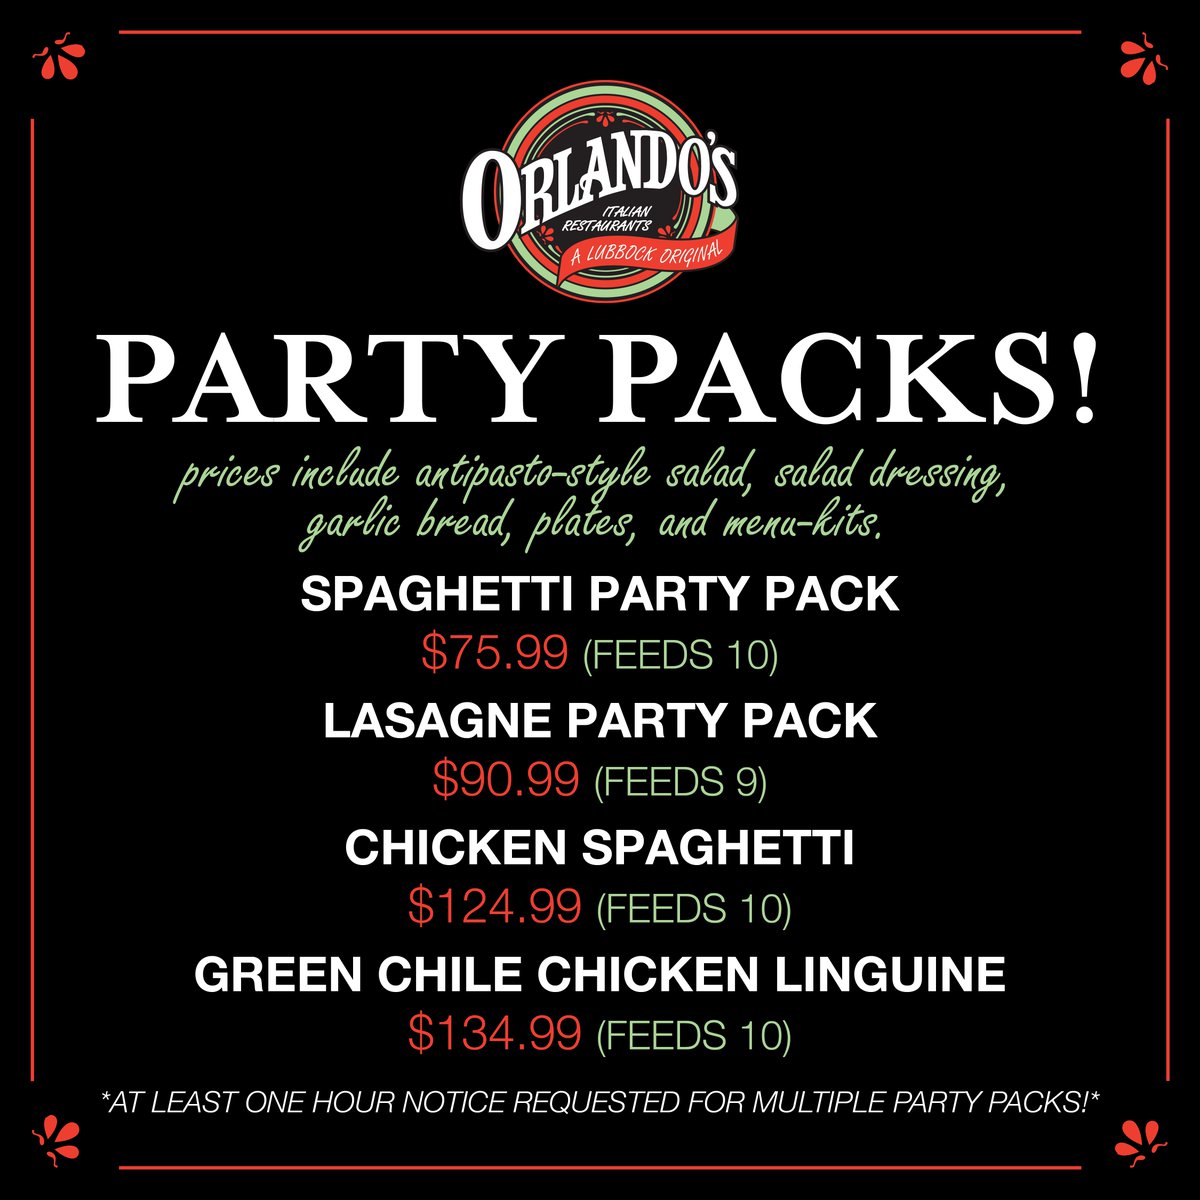 Looking for a game day feast? Grab one of our party packs and make it easy! 🍝   #ALubbockOriginal #BestItalianRestaurant #TexItalian #ToGo #LubbockRestaurant #DeliveryOrTakeOut #Delivery #GoodEats